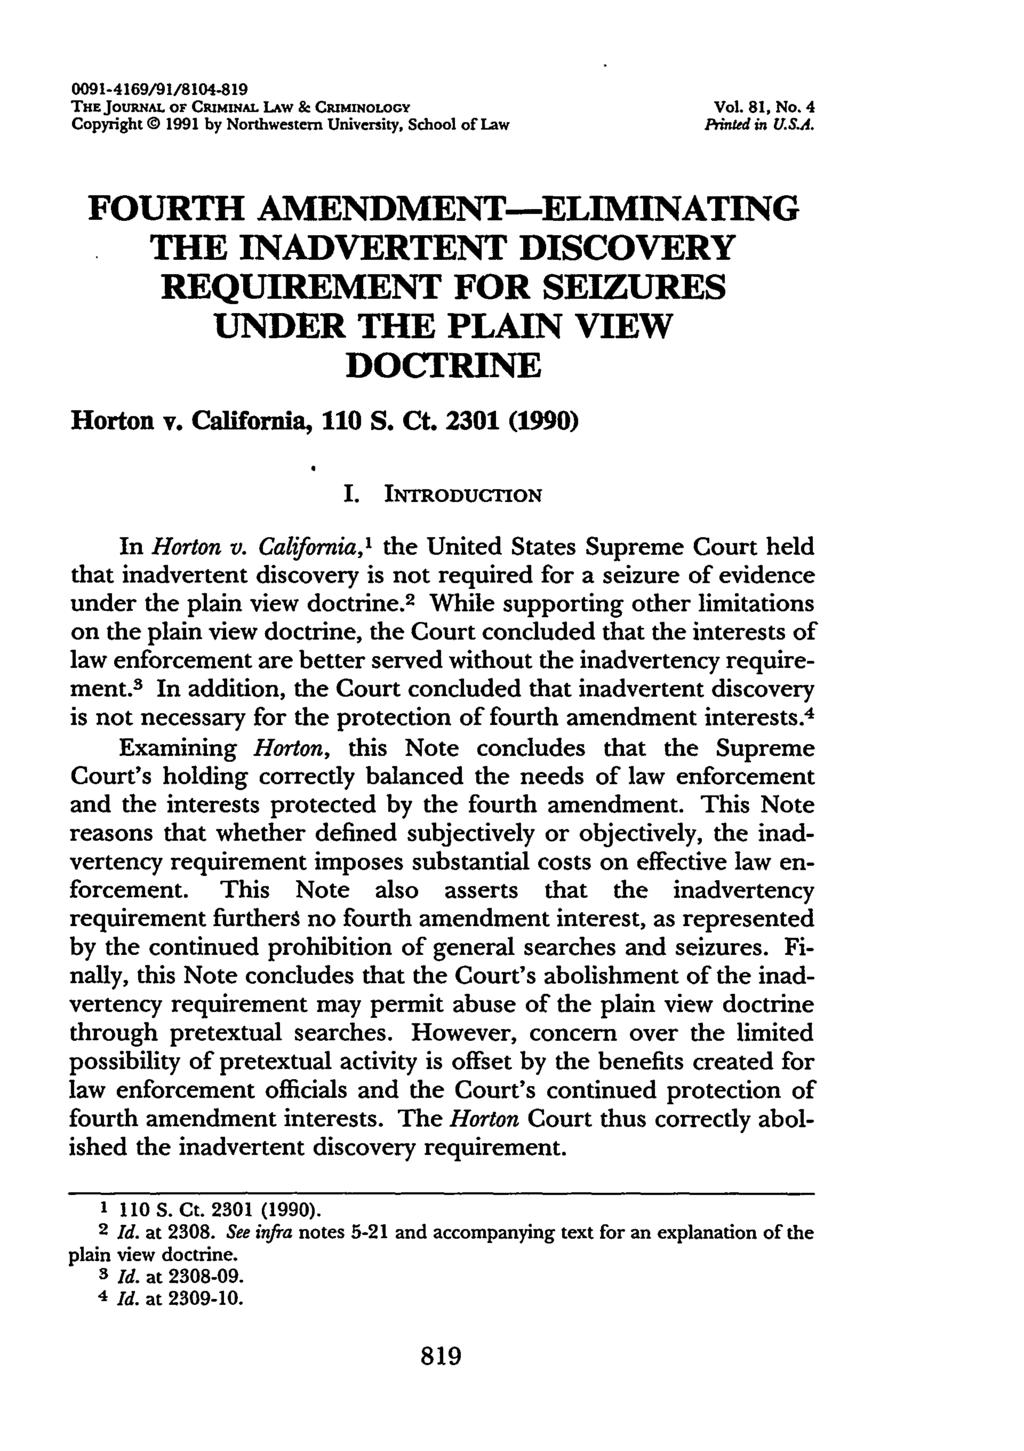 0091-4169/91/8104-819 THE JOURNAL. OF CRIMINAL LAW & CRIMINOLOGY Vol. 81, No. 4 Copyright @ 1991 by Northwestern University, School of Law Printed in U.S.A. FOURTH AMENDMENT-ELIMINATING THE INADVERTENT DISCOVERY REQUIREMENT FOR SEIZURES UNDER THE PLAIN VIEW DOCTRINE Horton v.